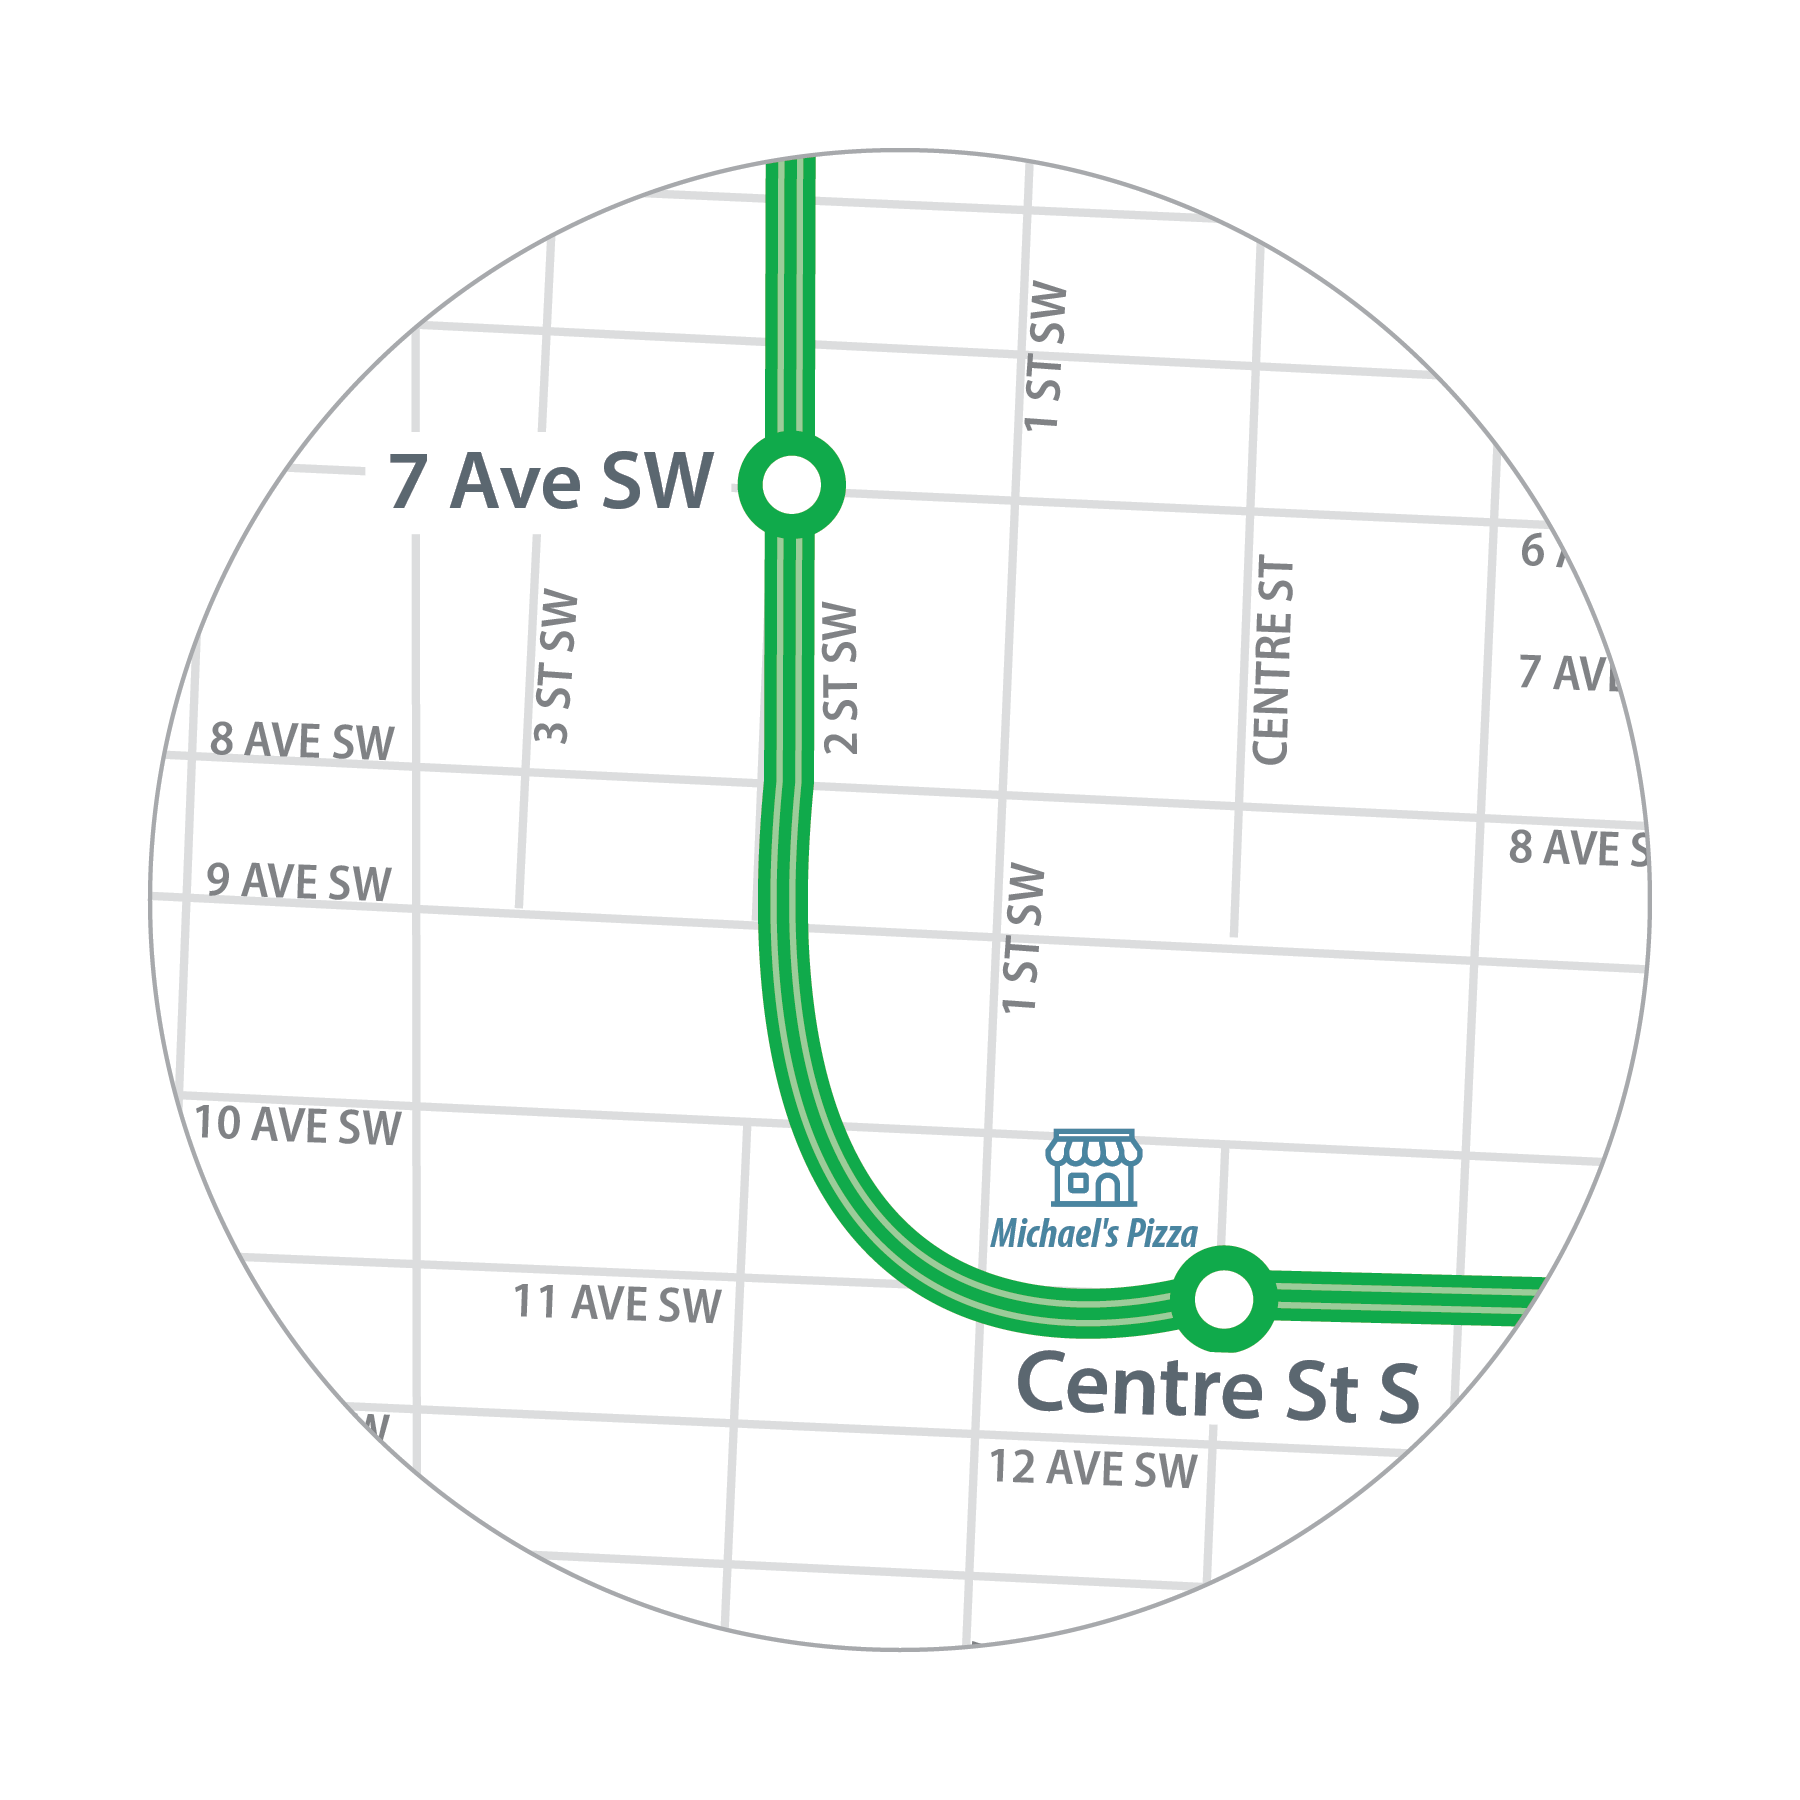 Map of Michael's Pizza location in relation to 7 Avenue S.W. and Centre Street S. Stations.